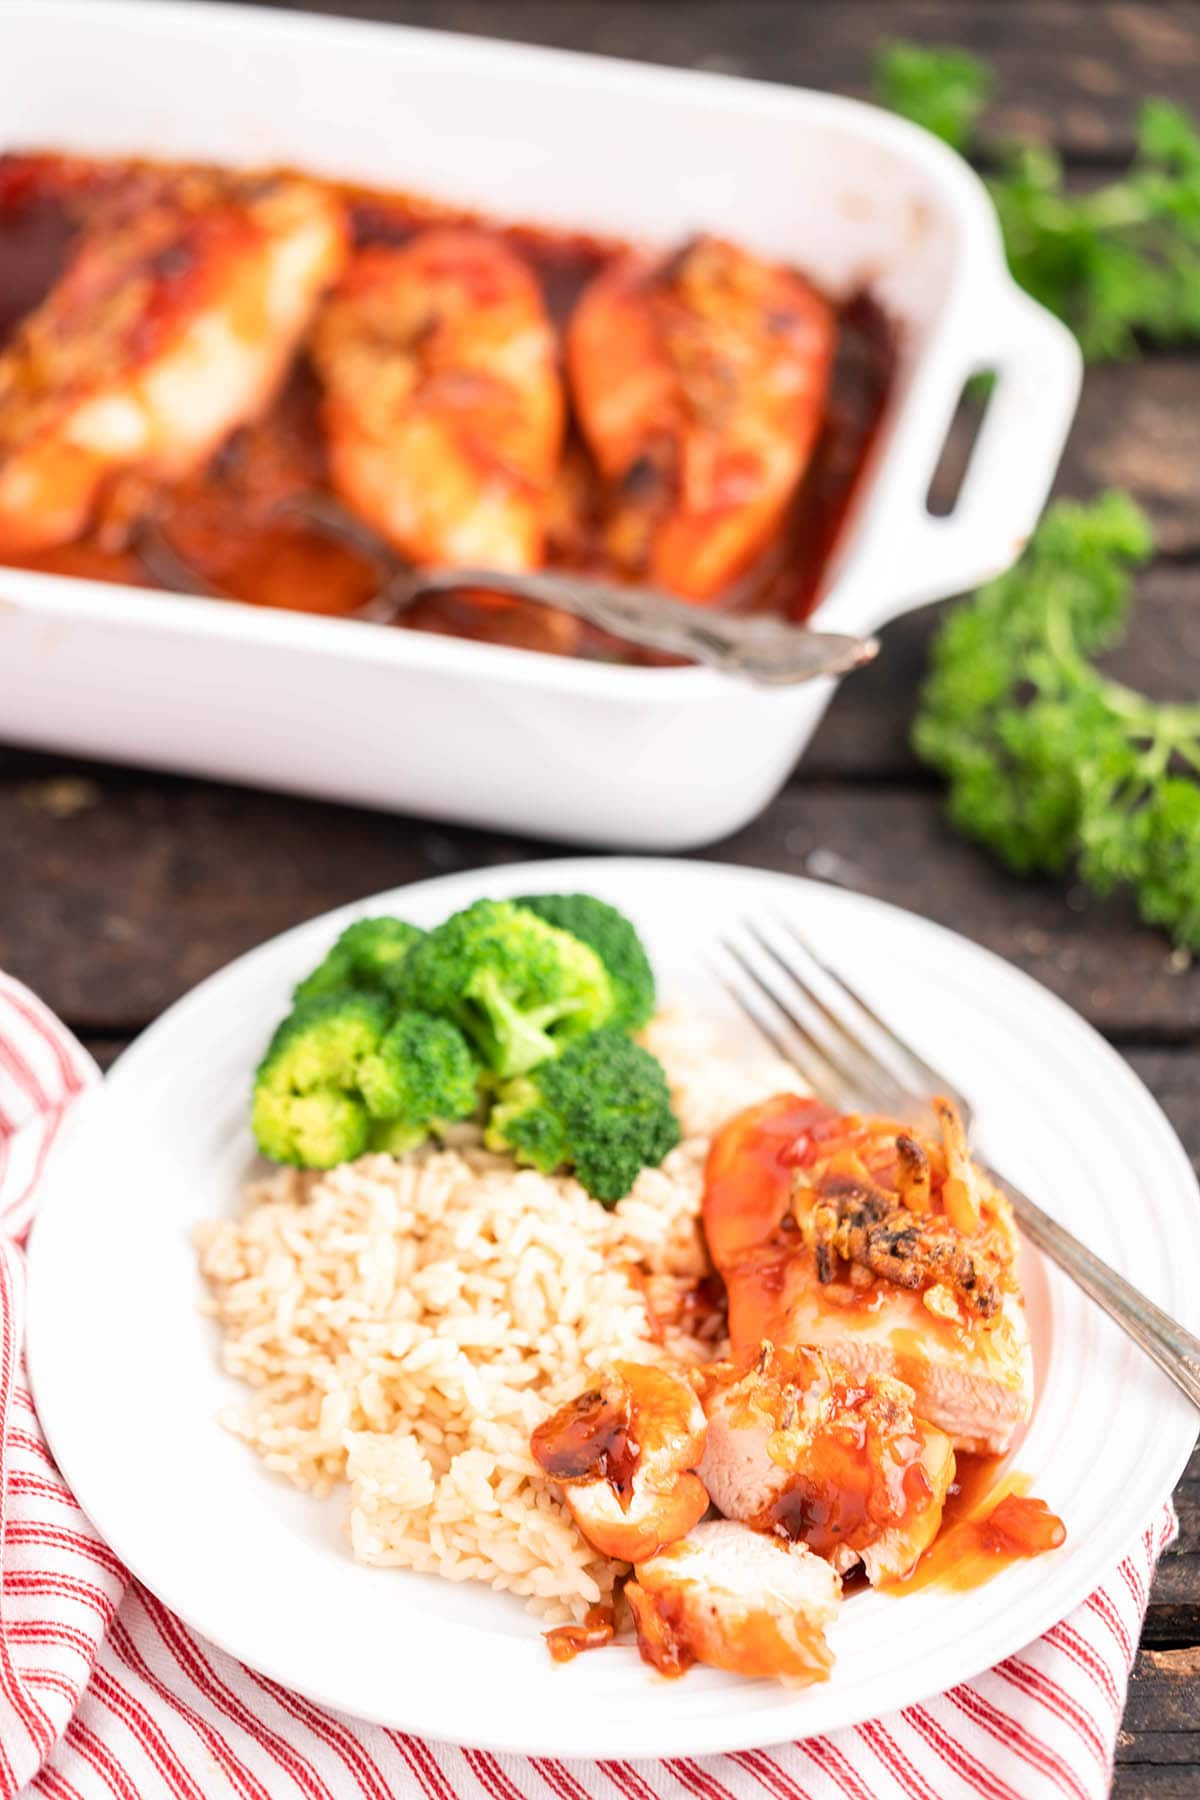 Sliced Apricot Chicken Casserole on plate with white rice.